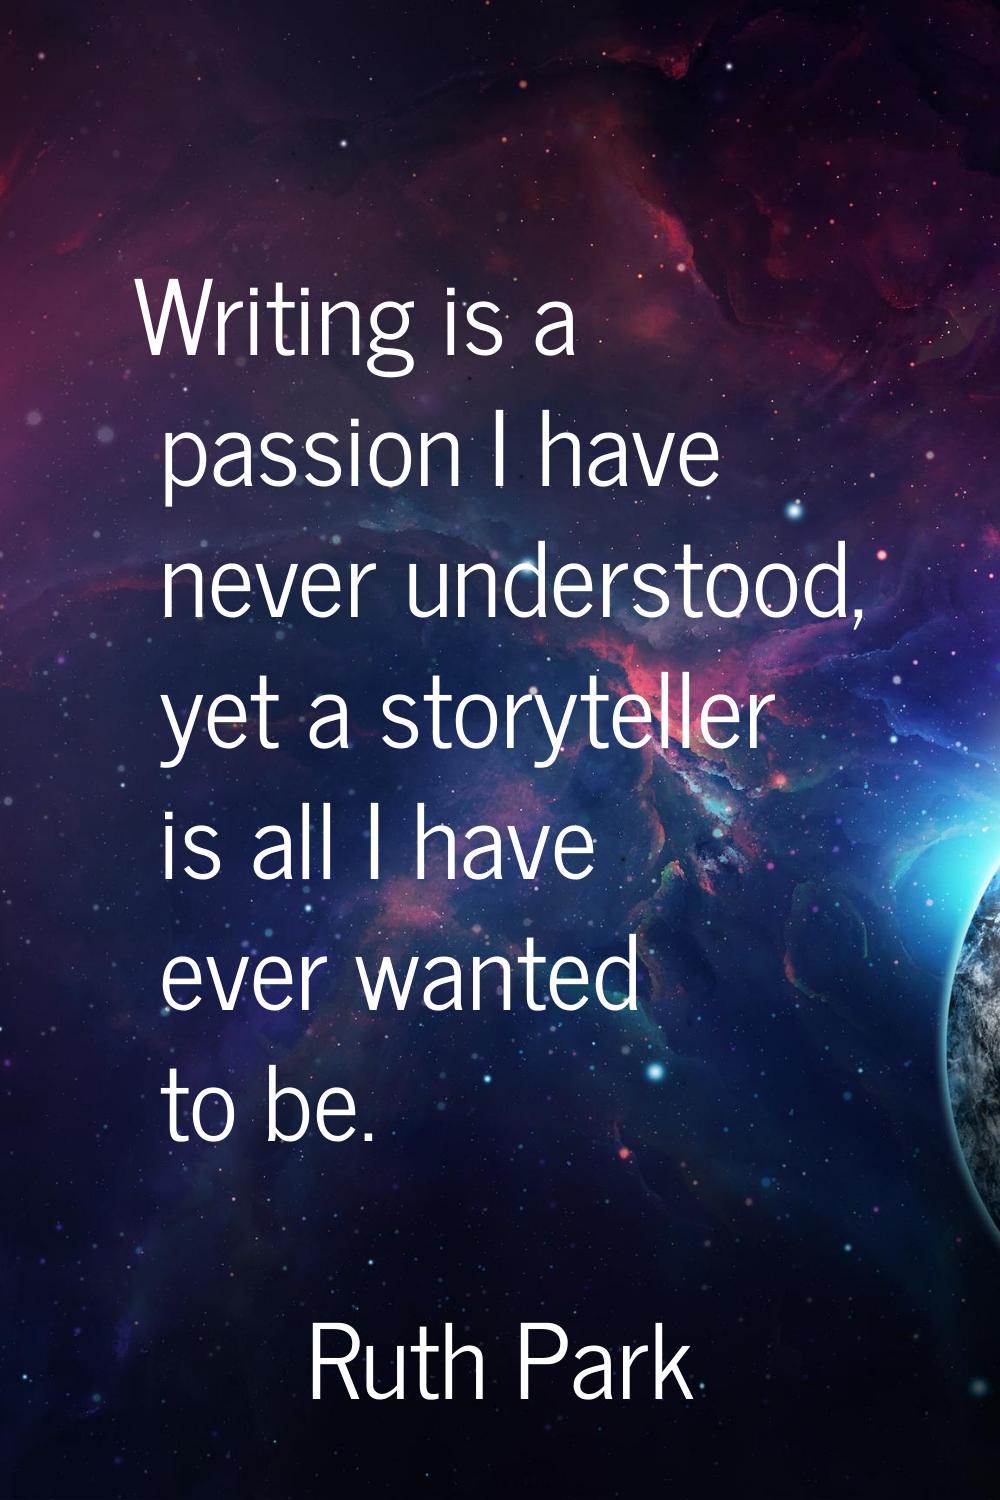 Writing is a passion I have never understood, yet a storyteller is all I have ever wanted to be.